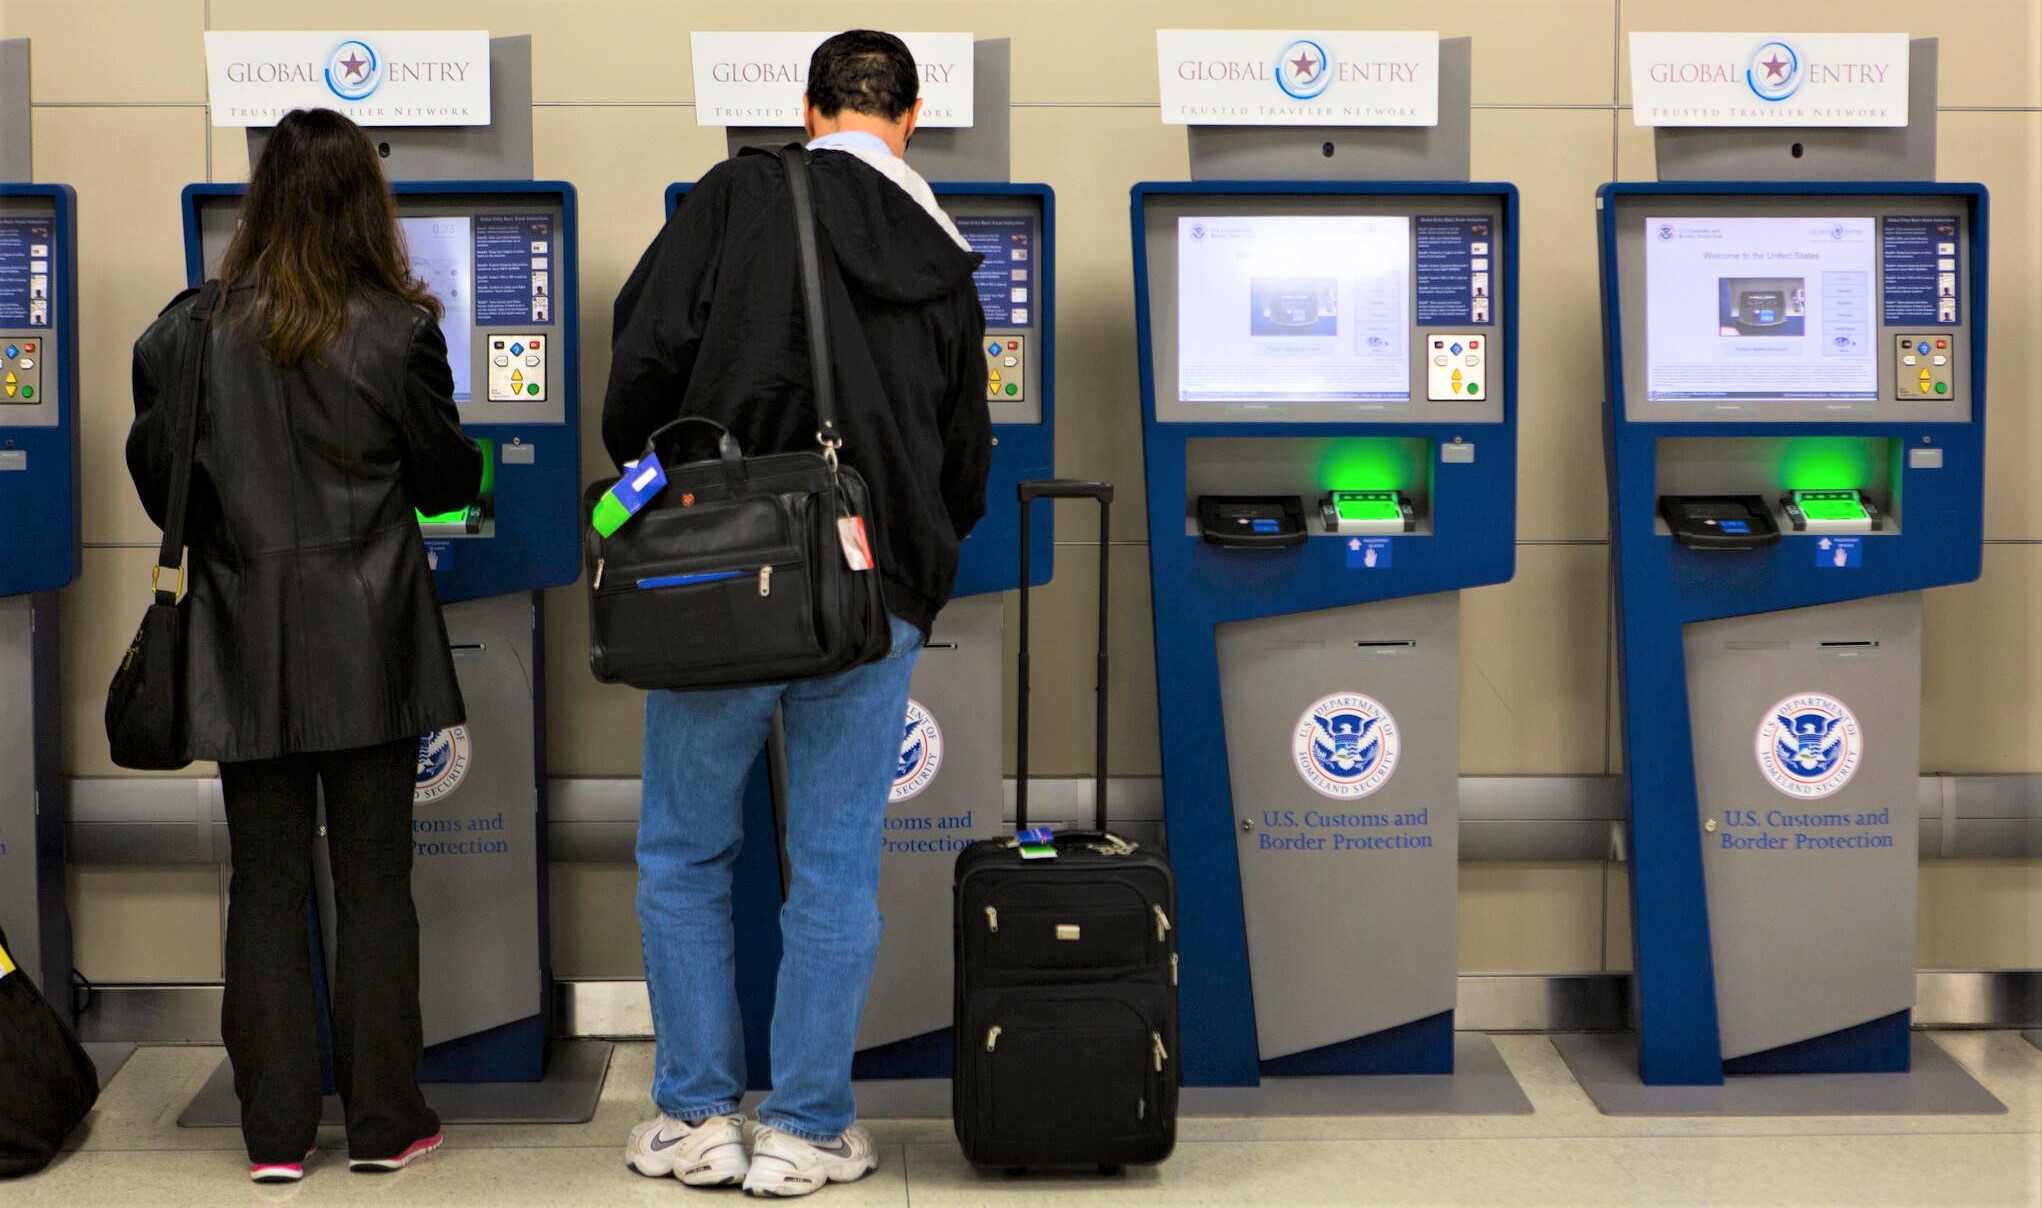 Global Entry, Global Entry Kiosk, Immigration Control